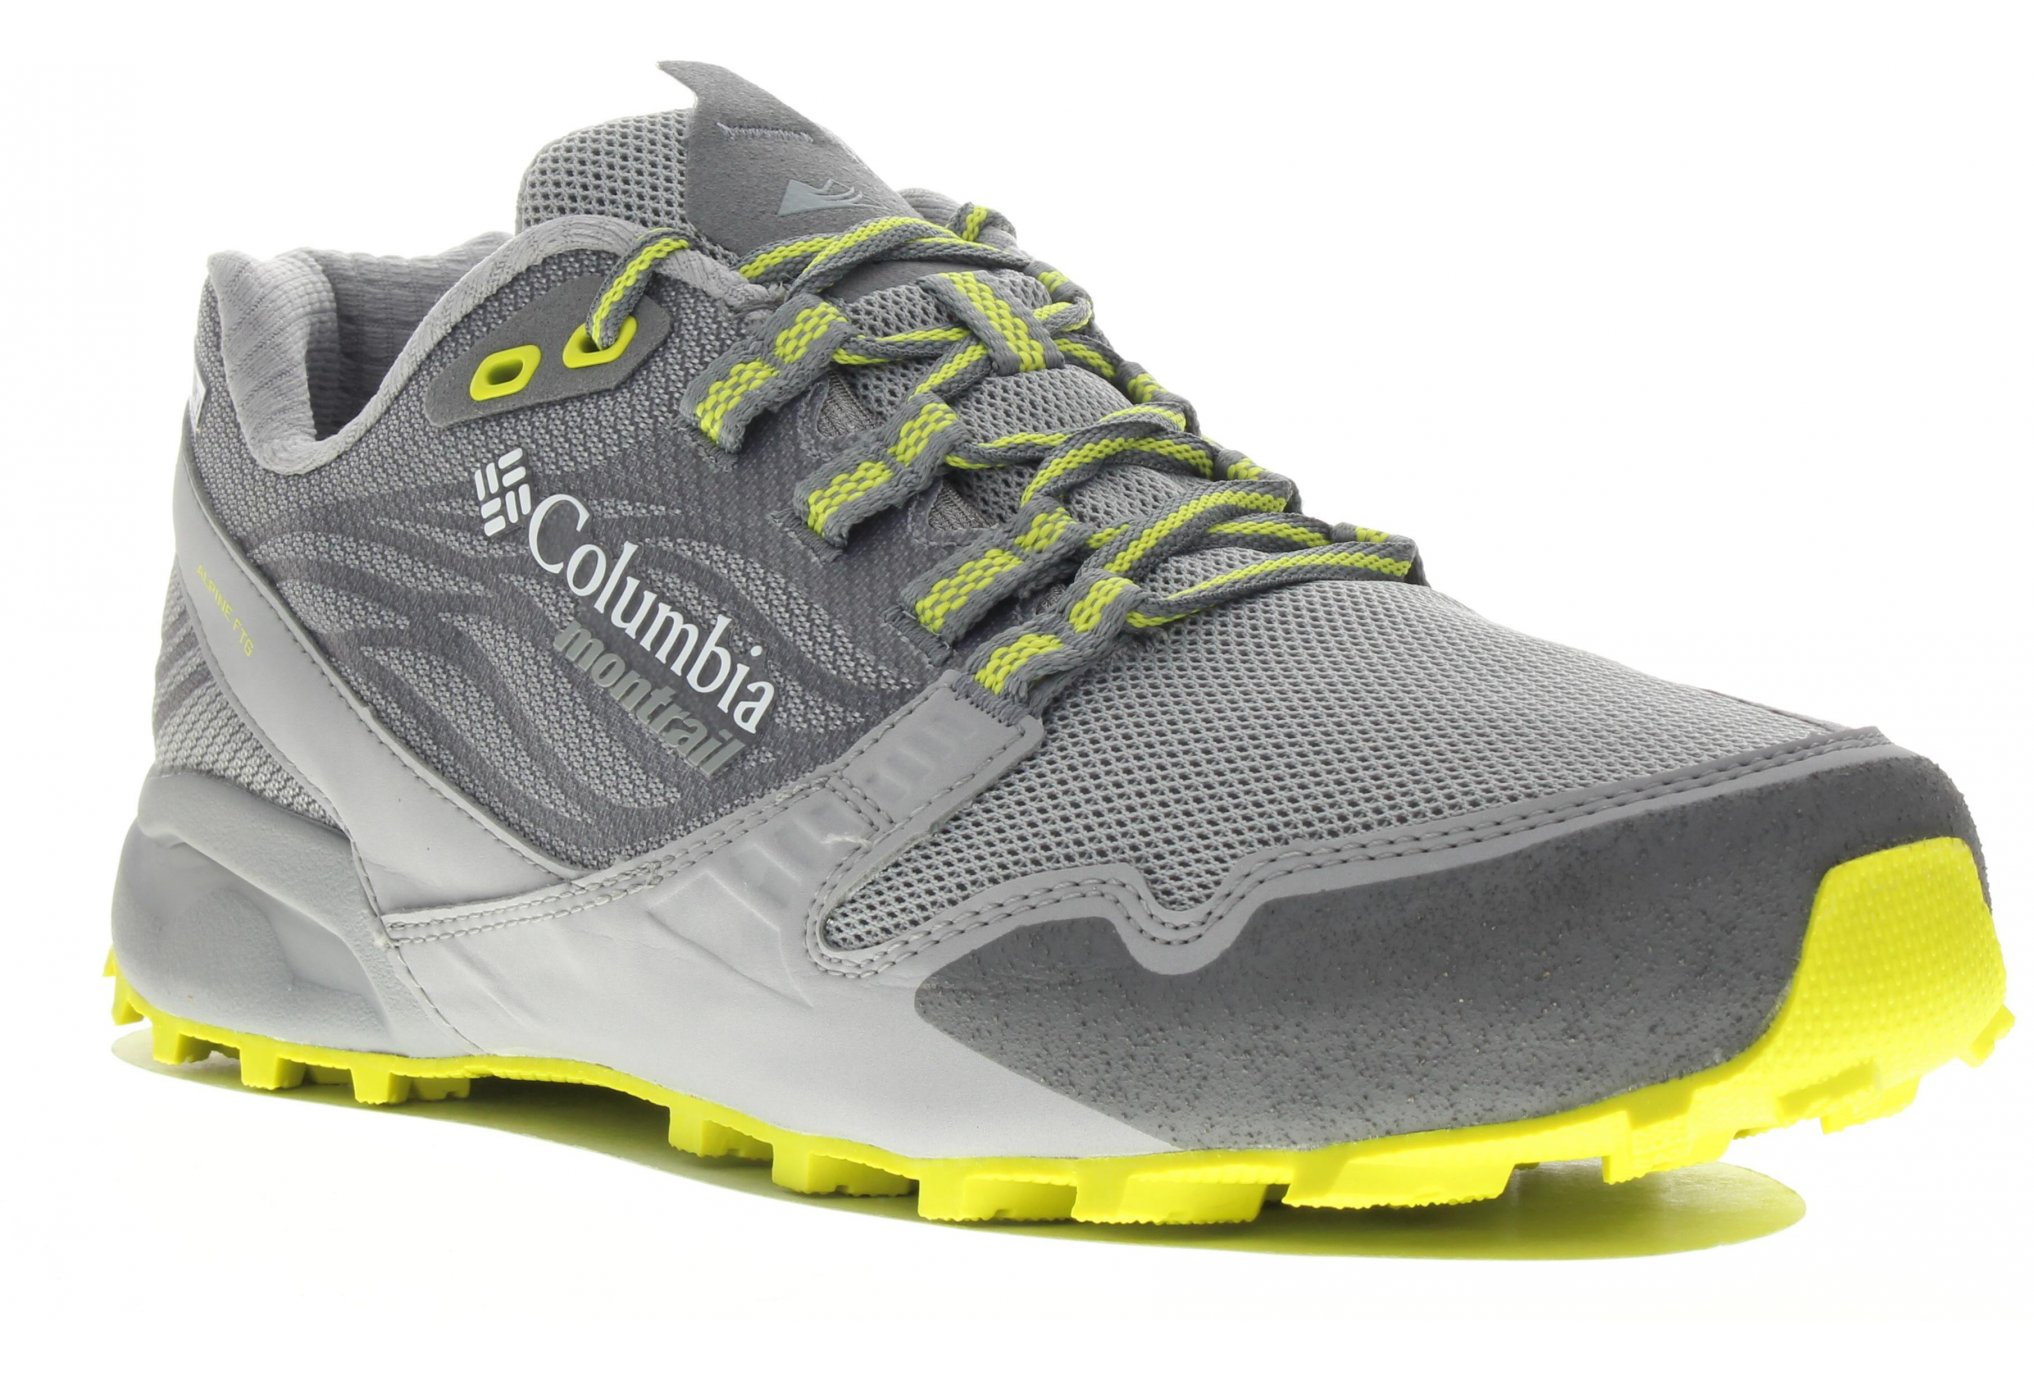 Columbia Alpine ftg outdry m chaussures homme